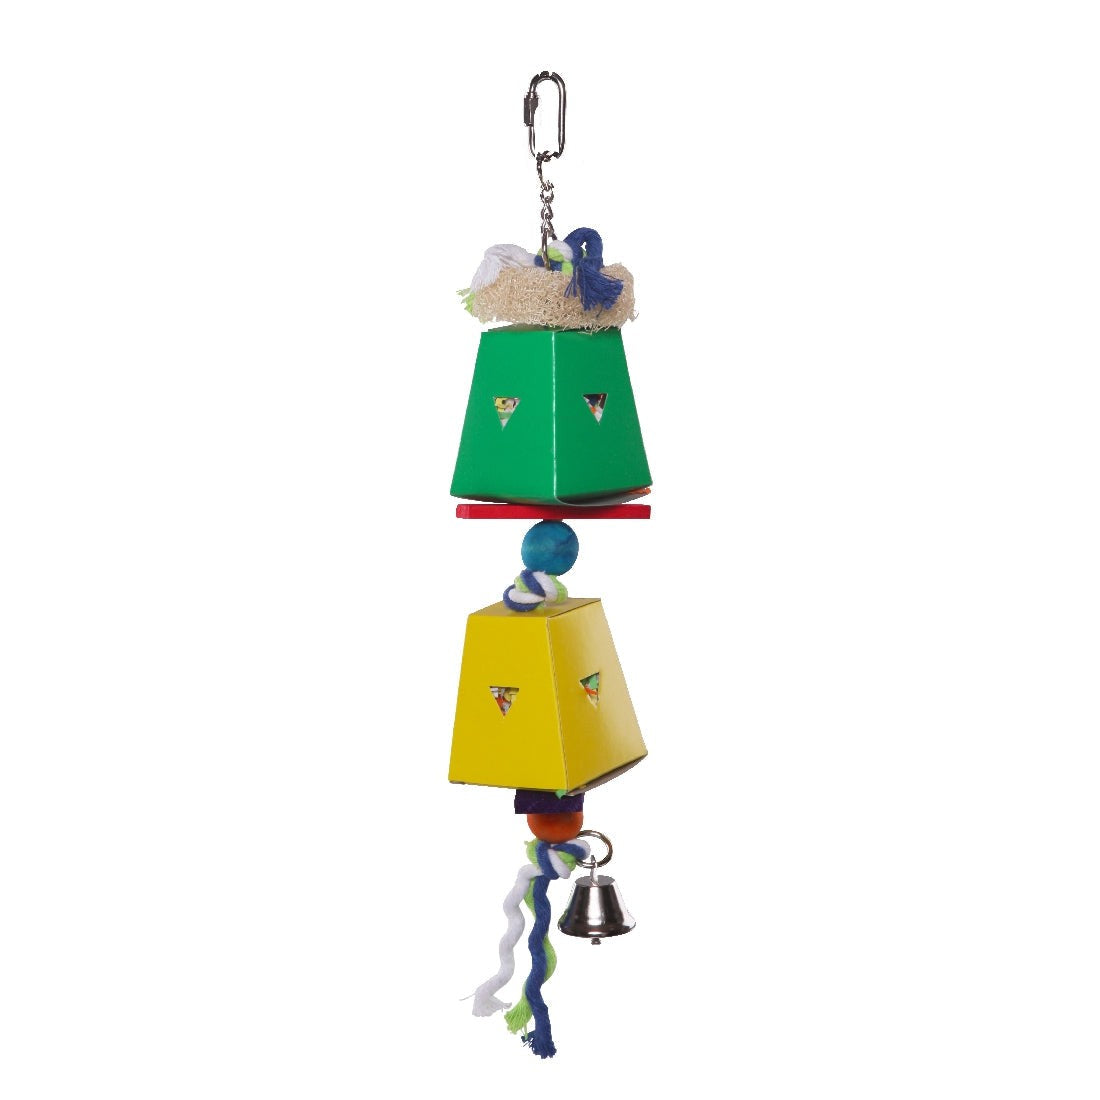 Colorful hanging bird toy with bells, beads, and chewable parts.